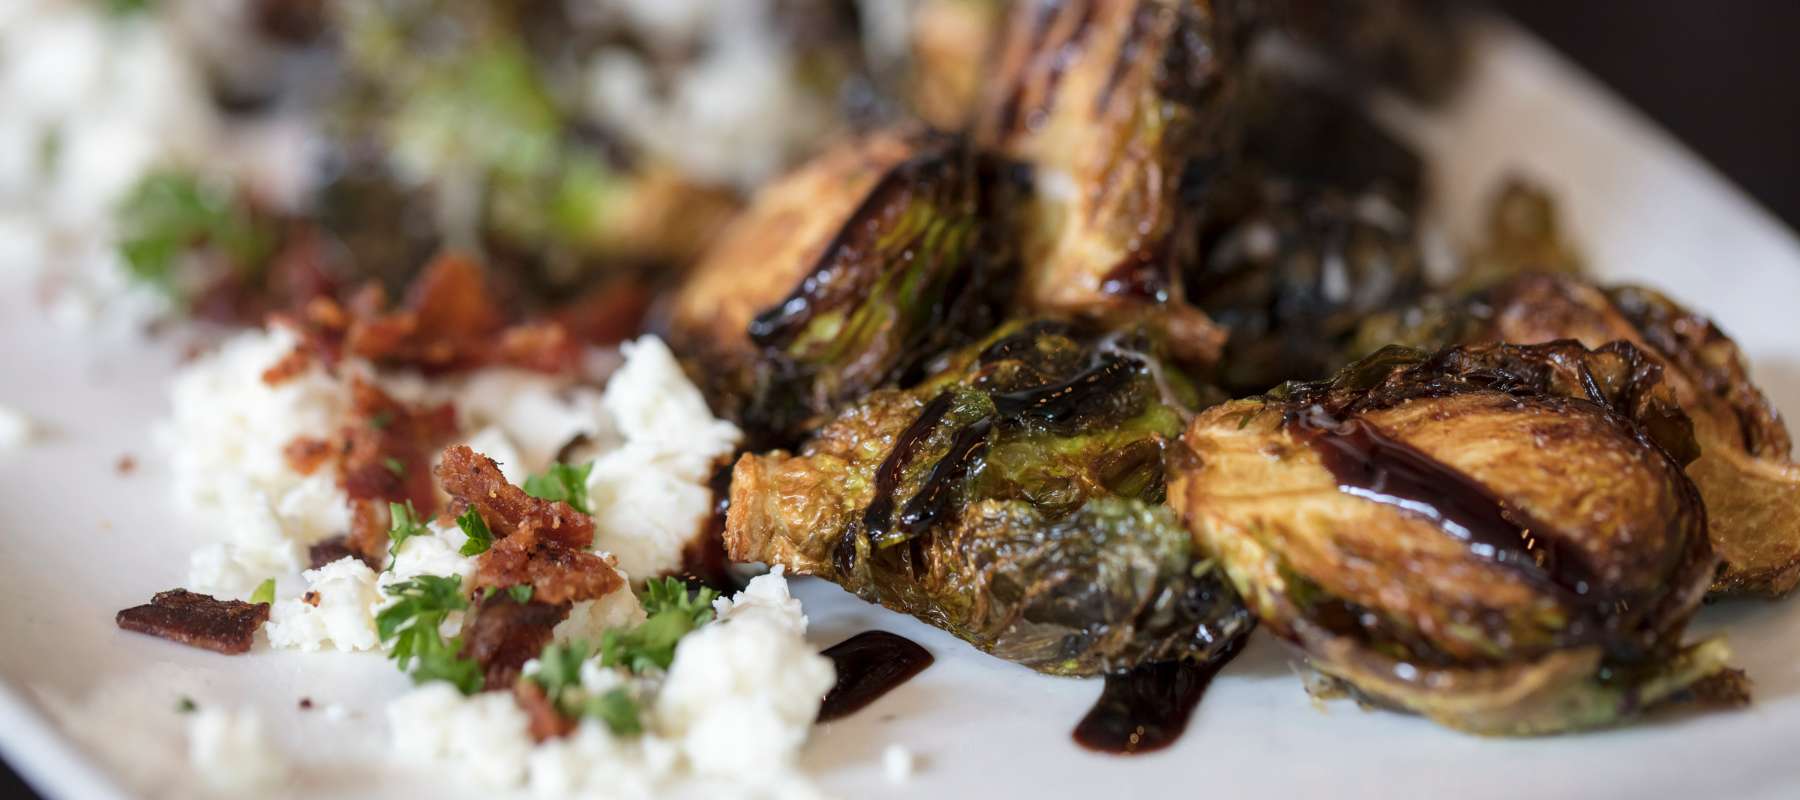 Roasted brussels sprouts with balsamic & bacon